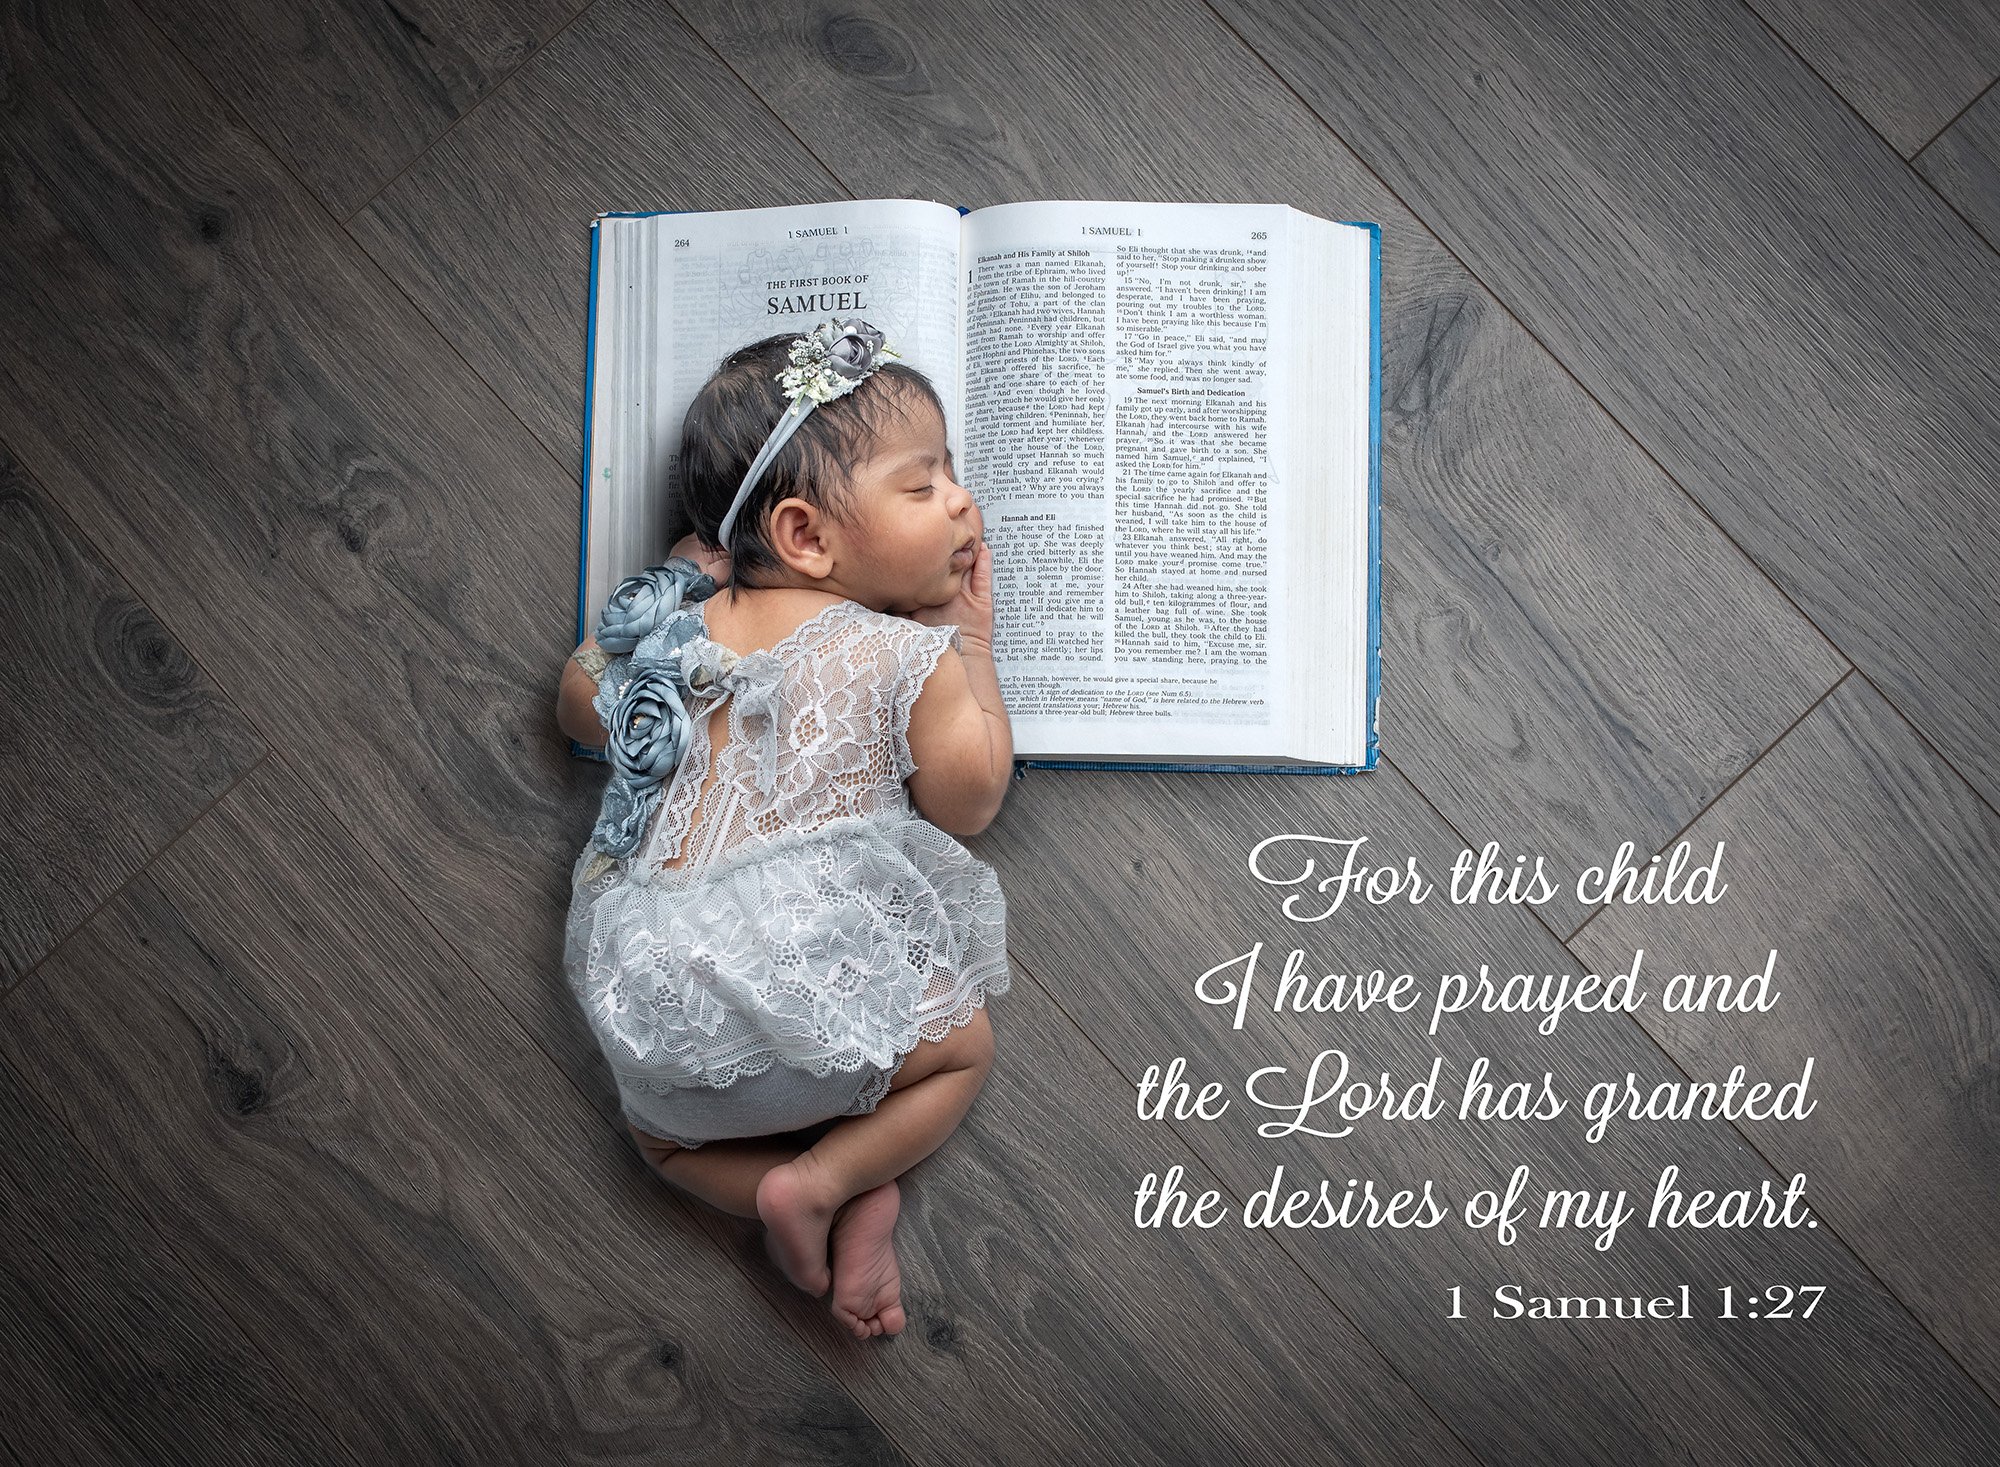 newborn photographs of an answered prayer newborn baby girl dressed in floral lace grey dress sound asleep with her head on the Bible including bible quote on wooden background